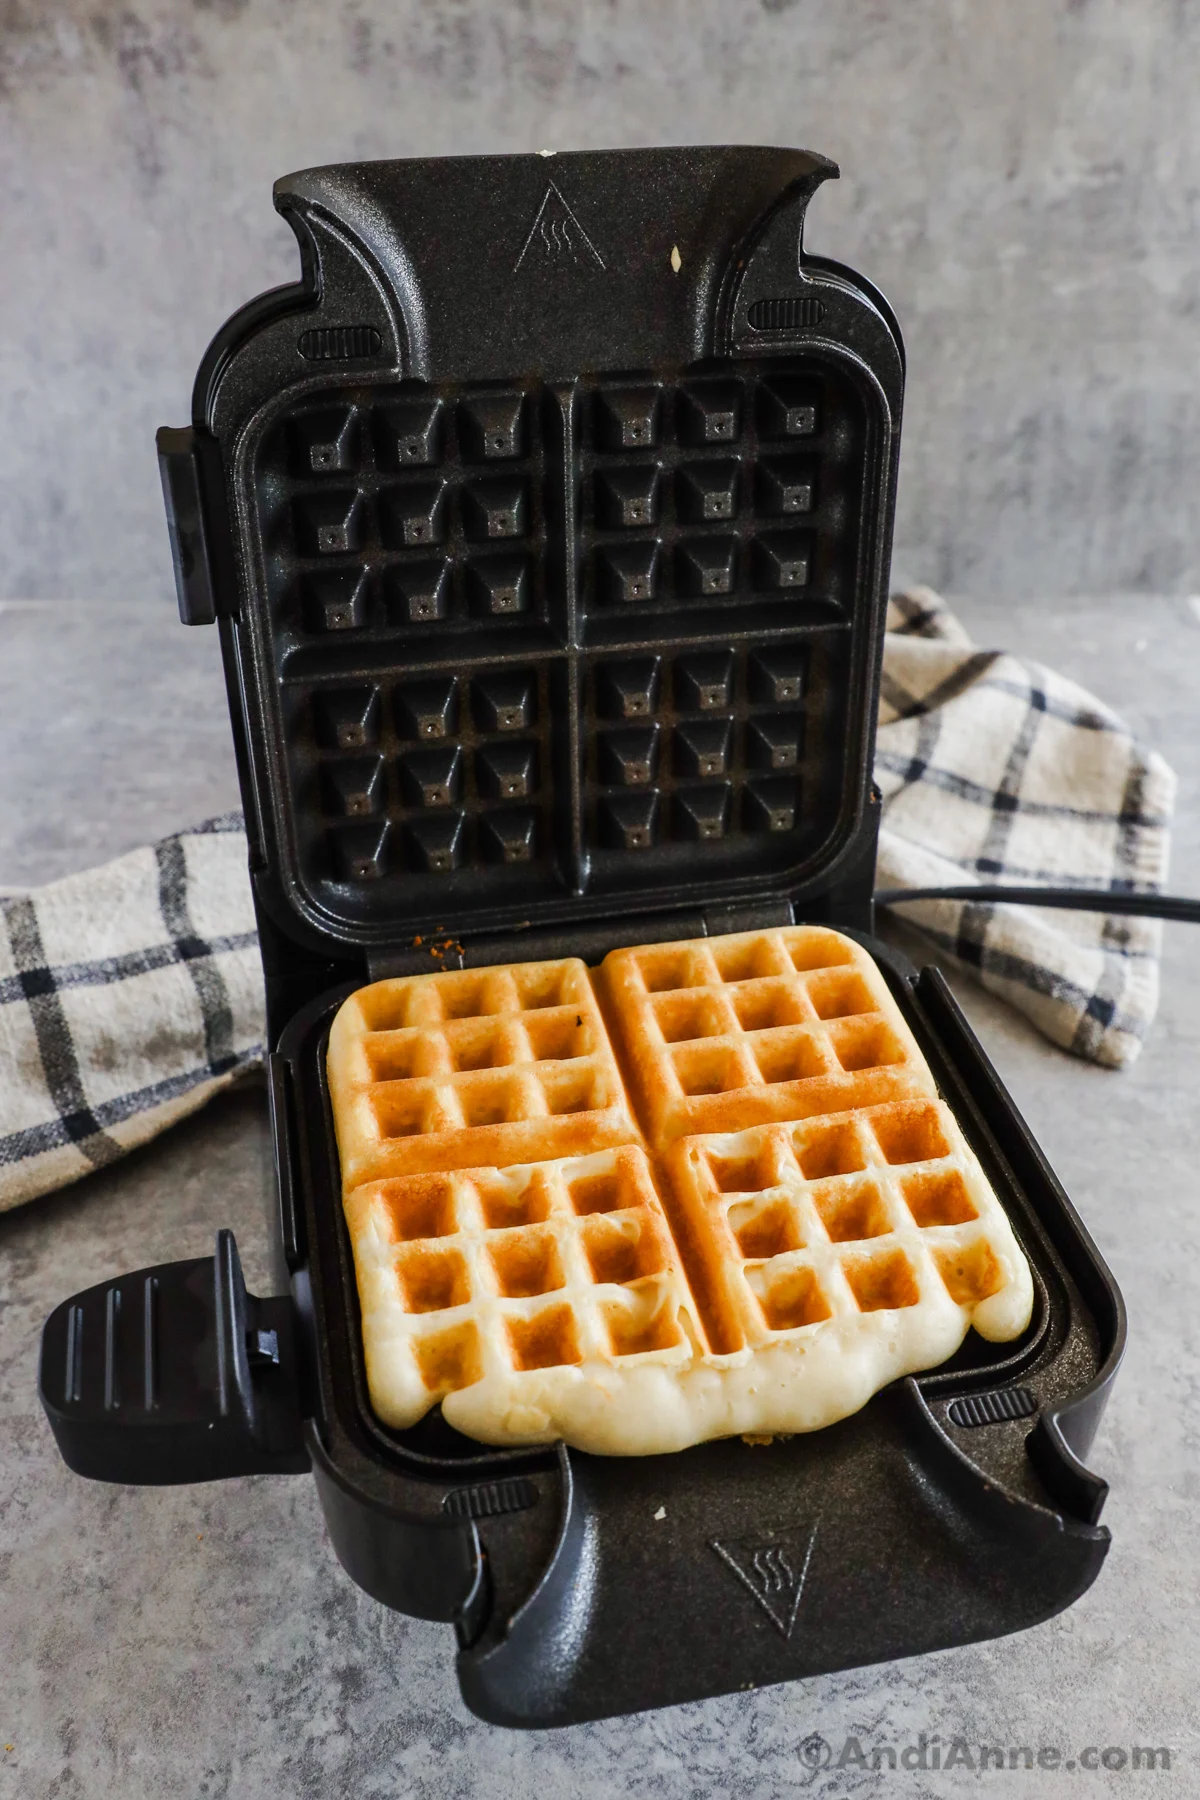 A waffle iron with a cooked classic waffle recipe inside.